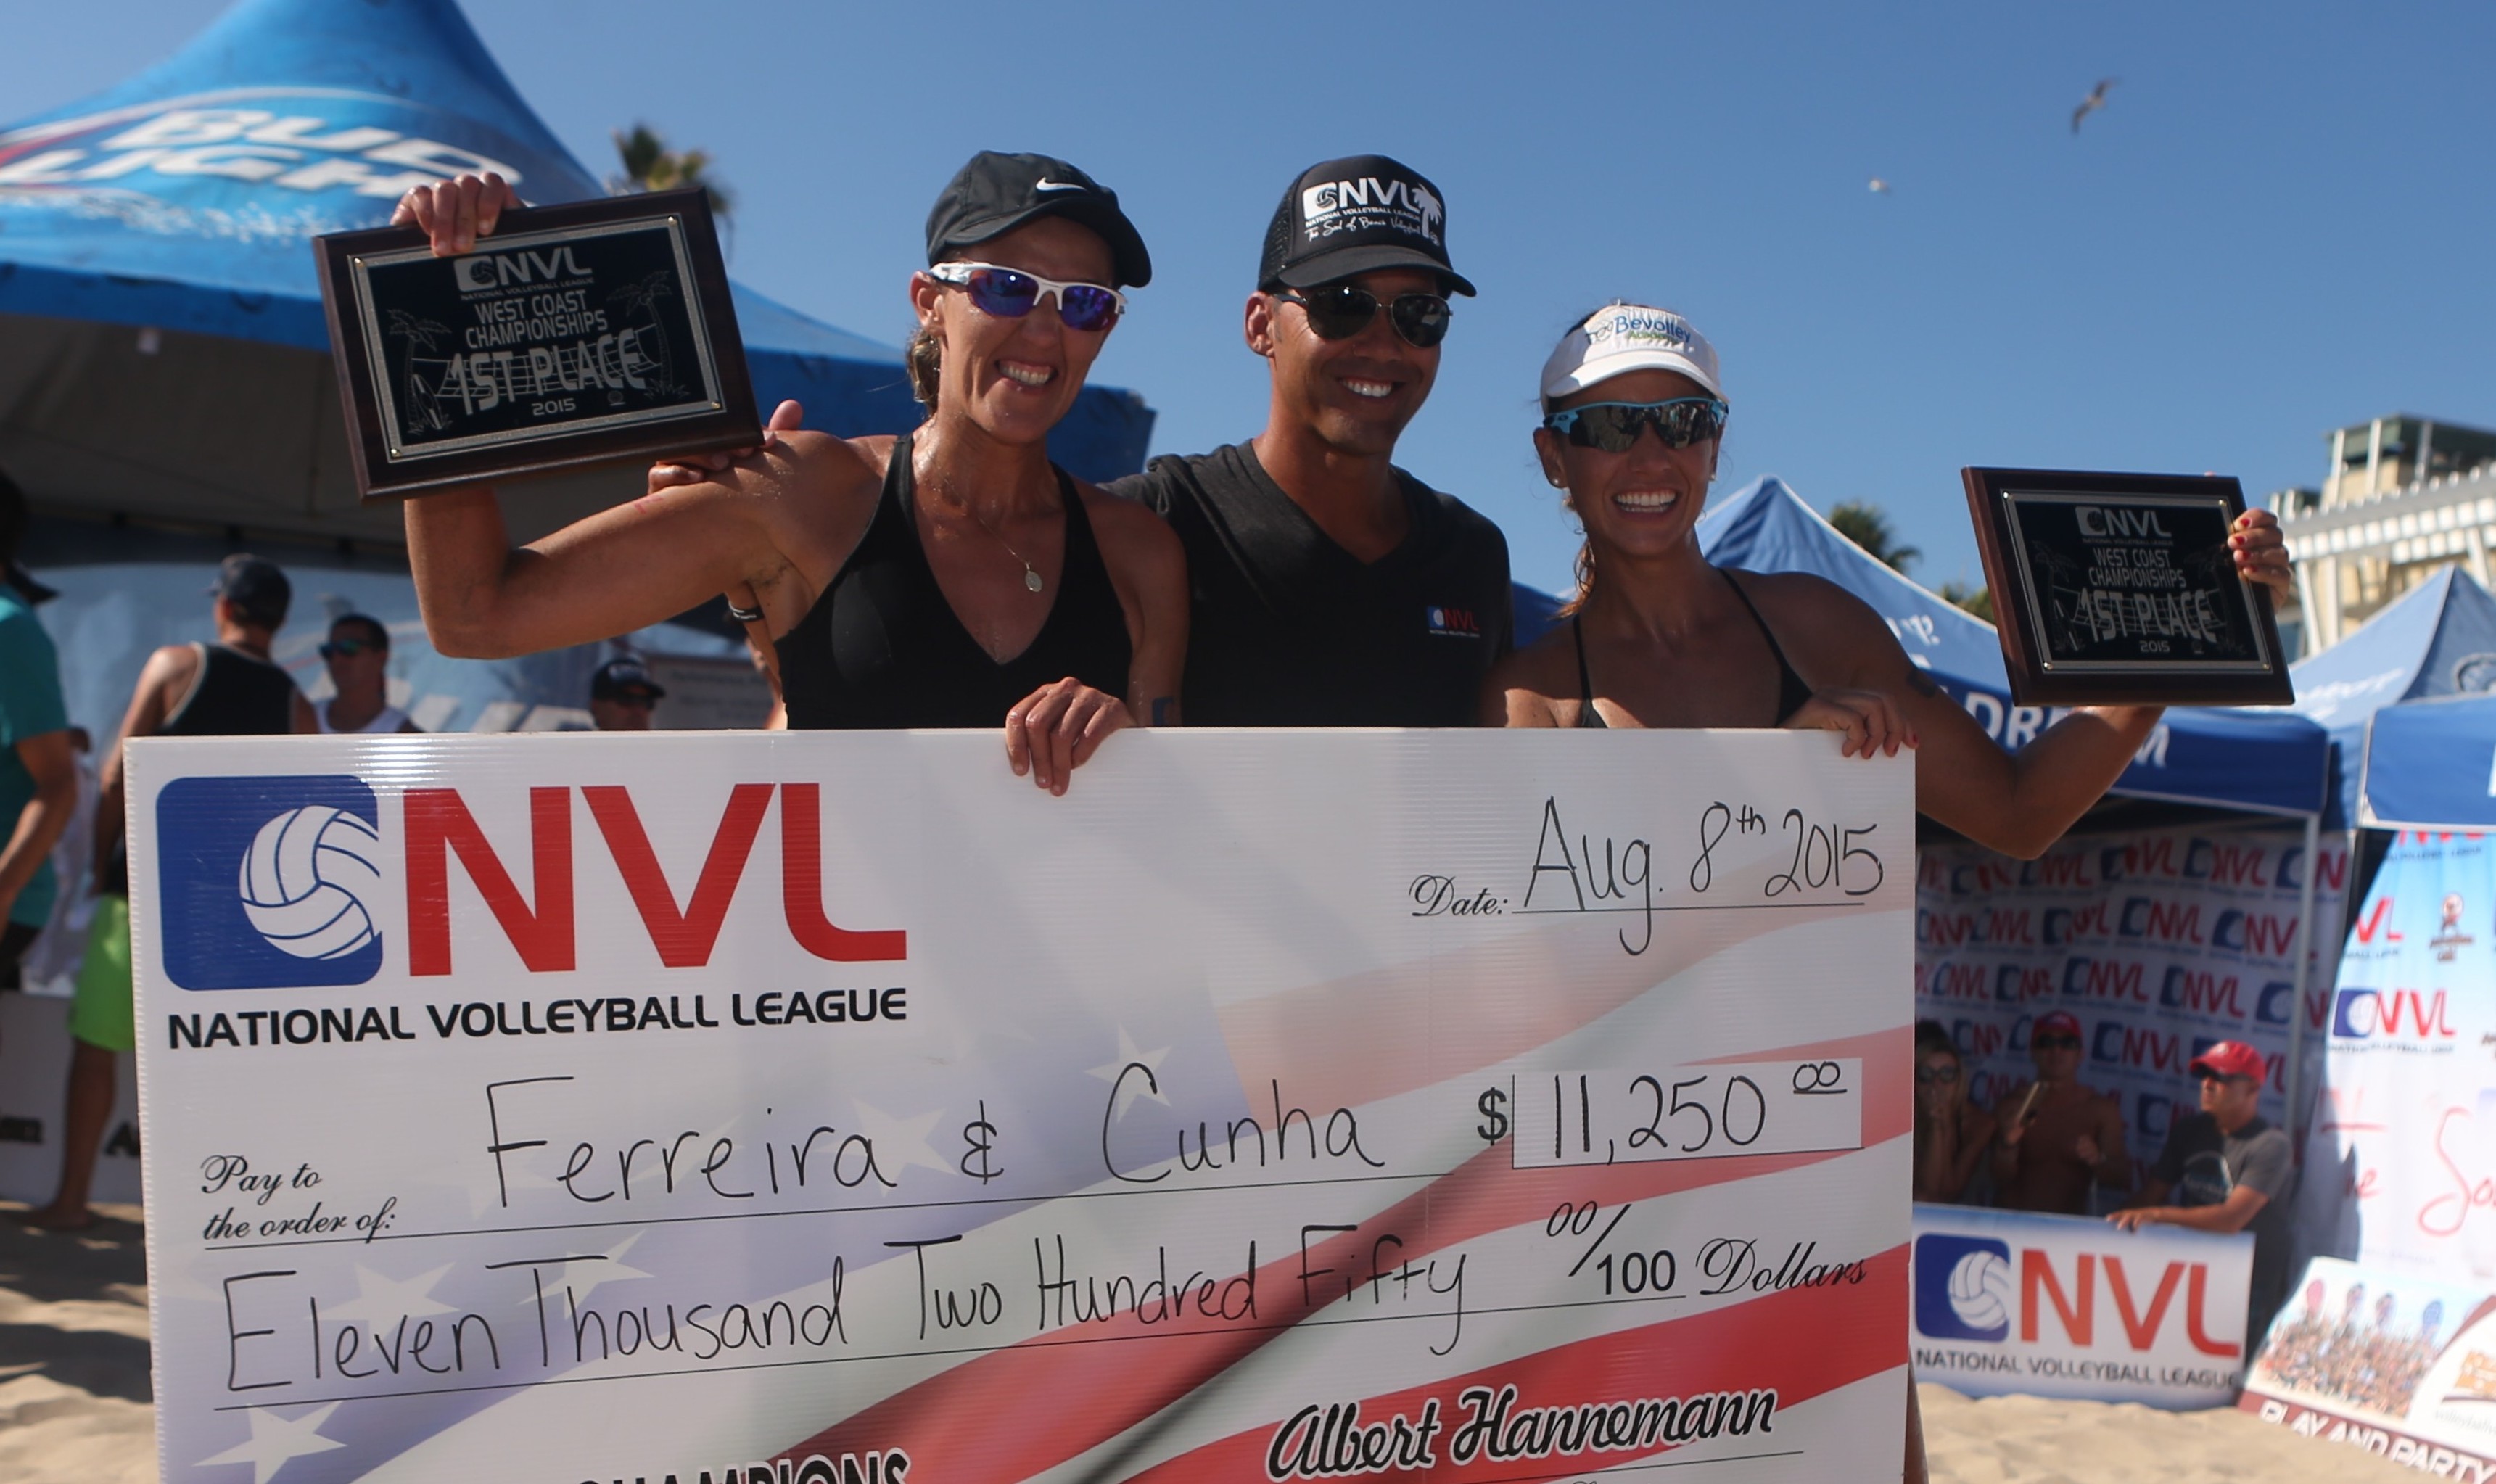 Three-Peat For Vivian Cunha & Raquel Goncalves Ferreira; Dave Palm & Eric Zaun Crowned Men’s Winners At National Volleyball League West Coast Championships